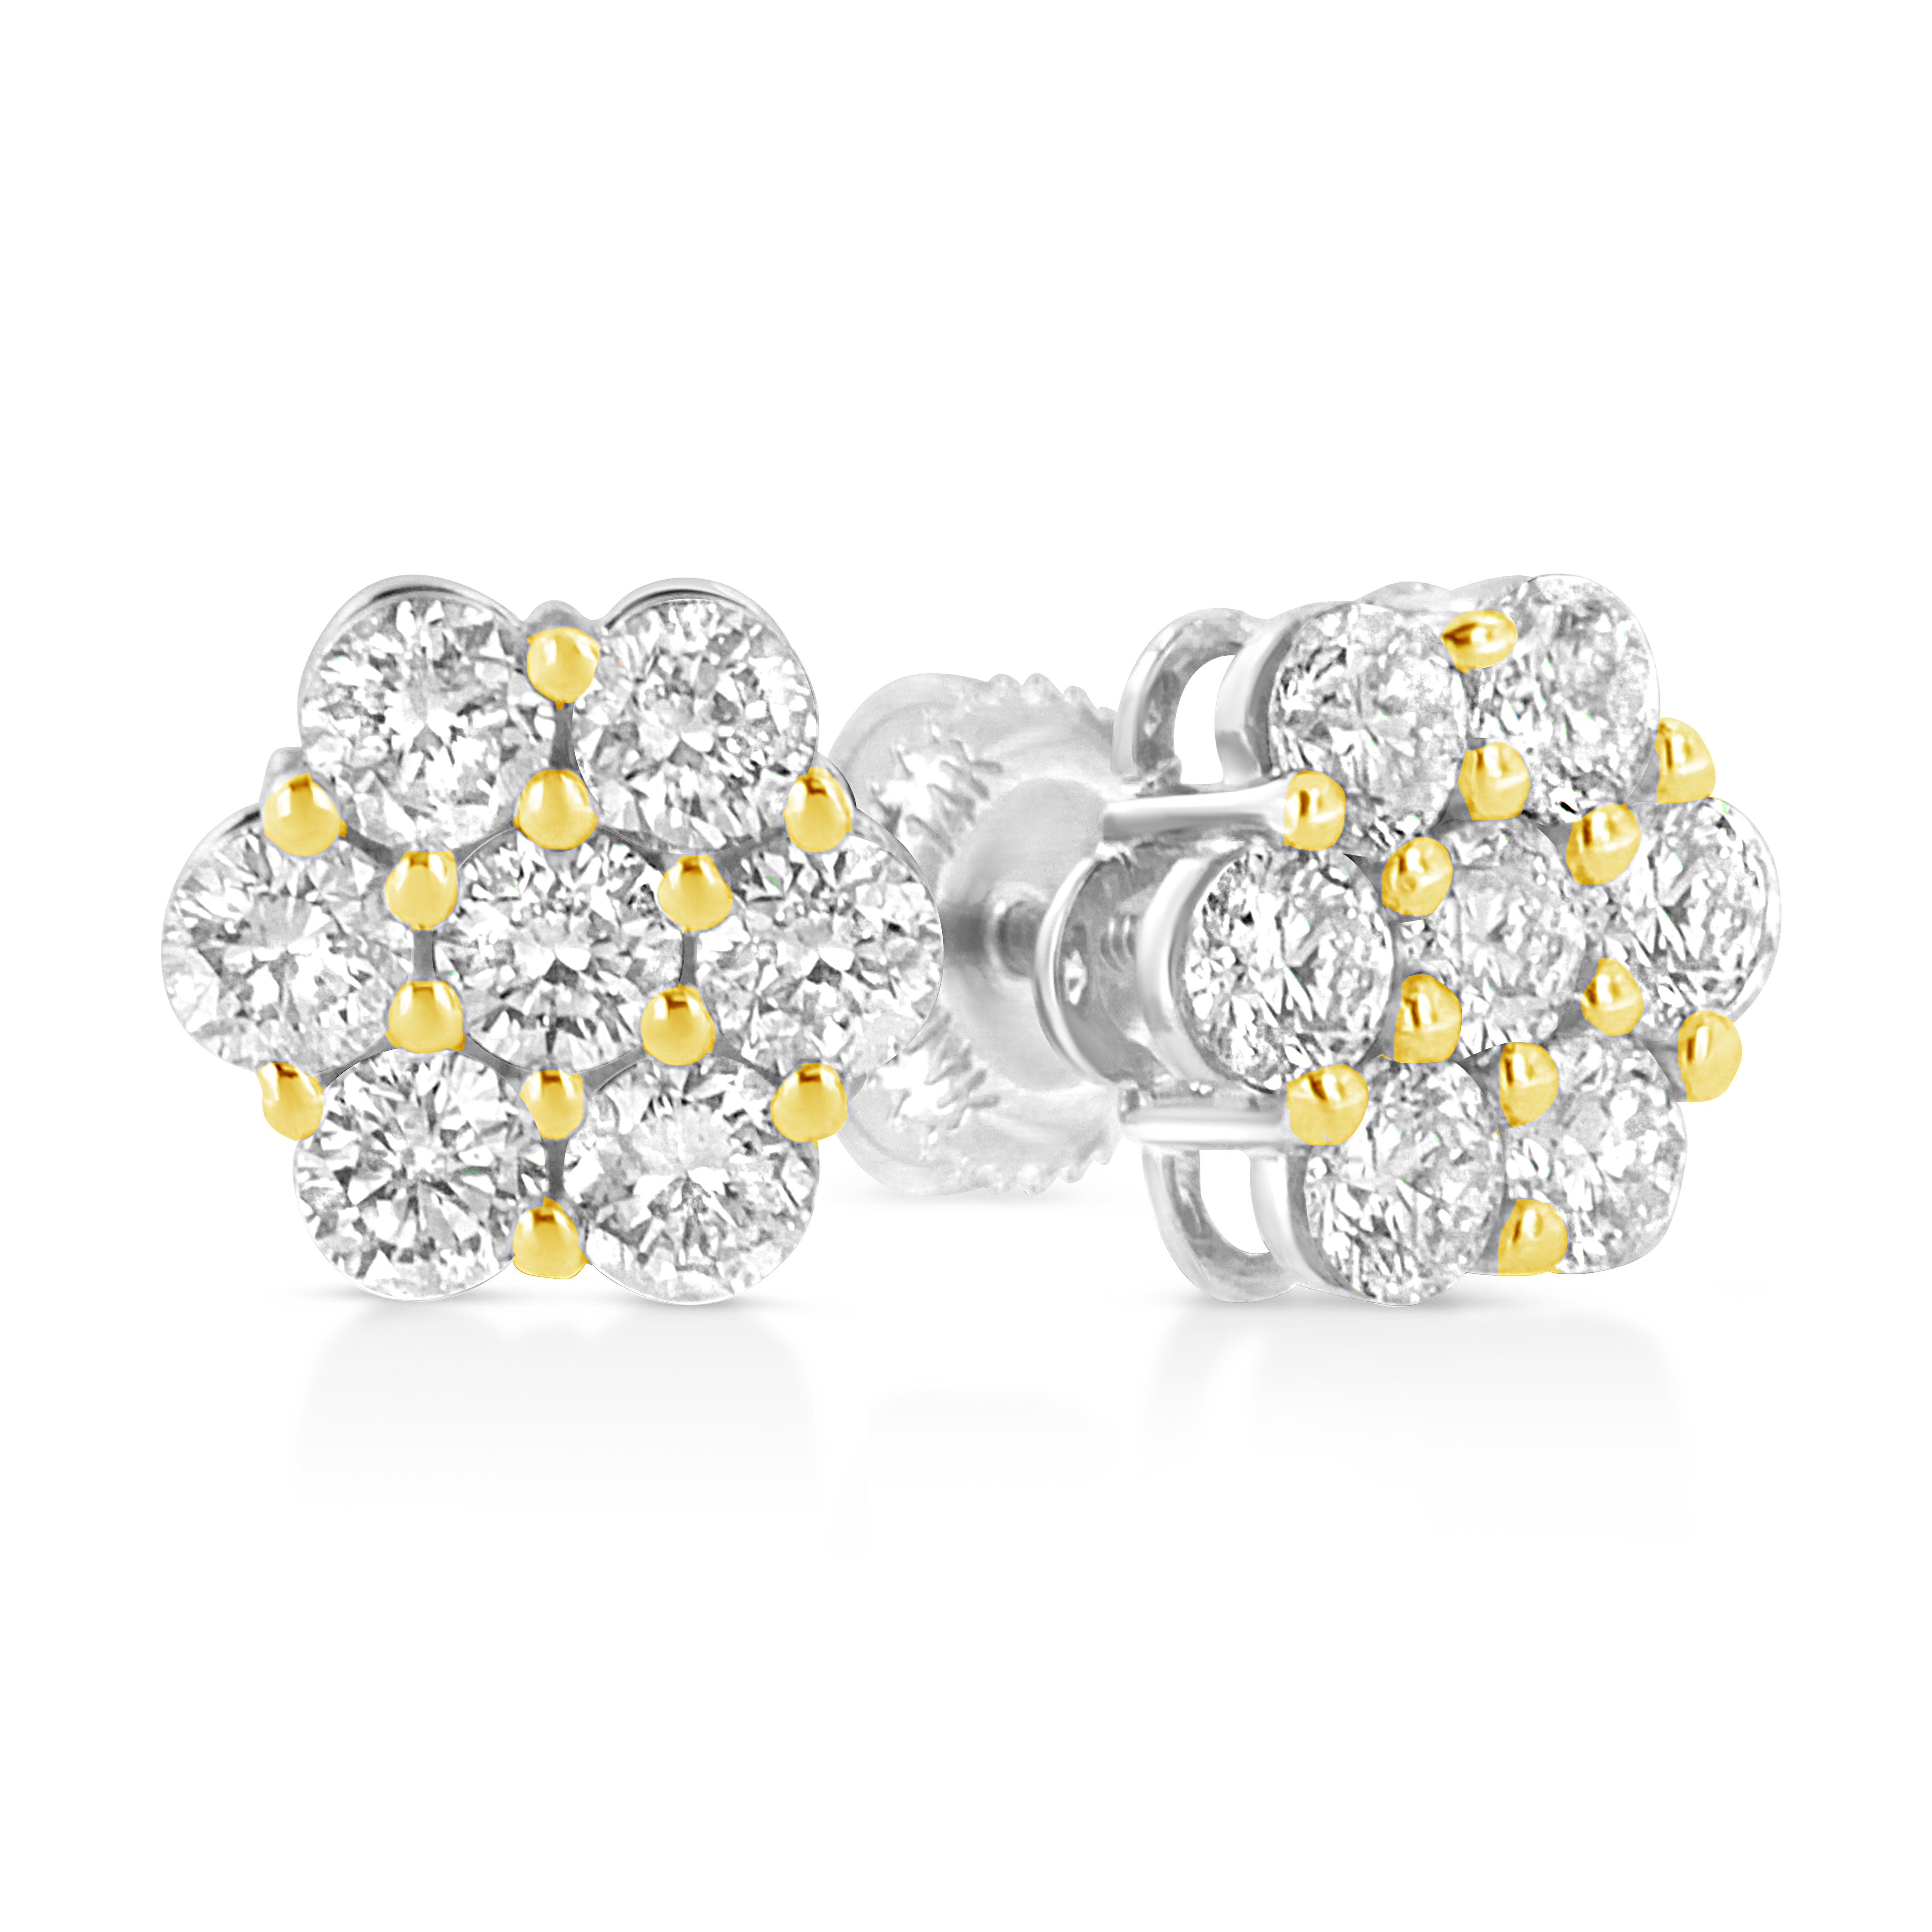 Yellow Gold Over Silver 1/4 Ct Diamond Cluster Stud Earrings